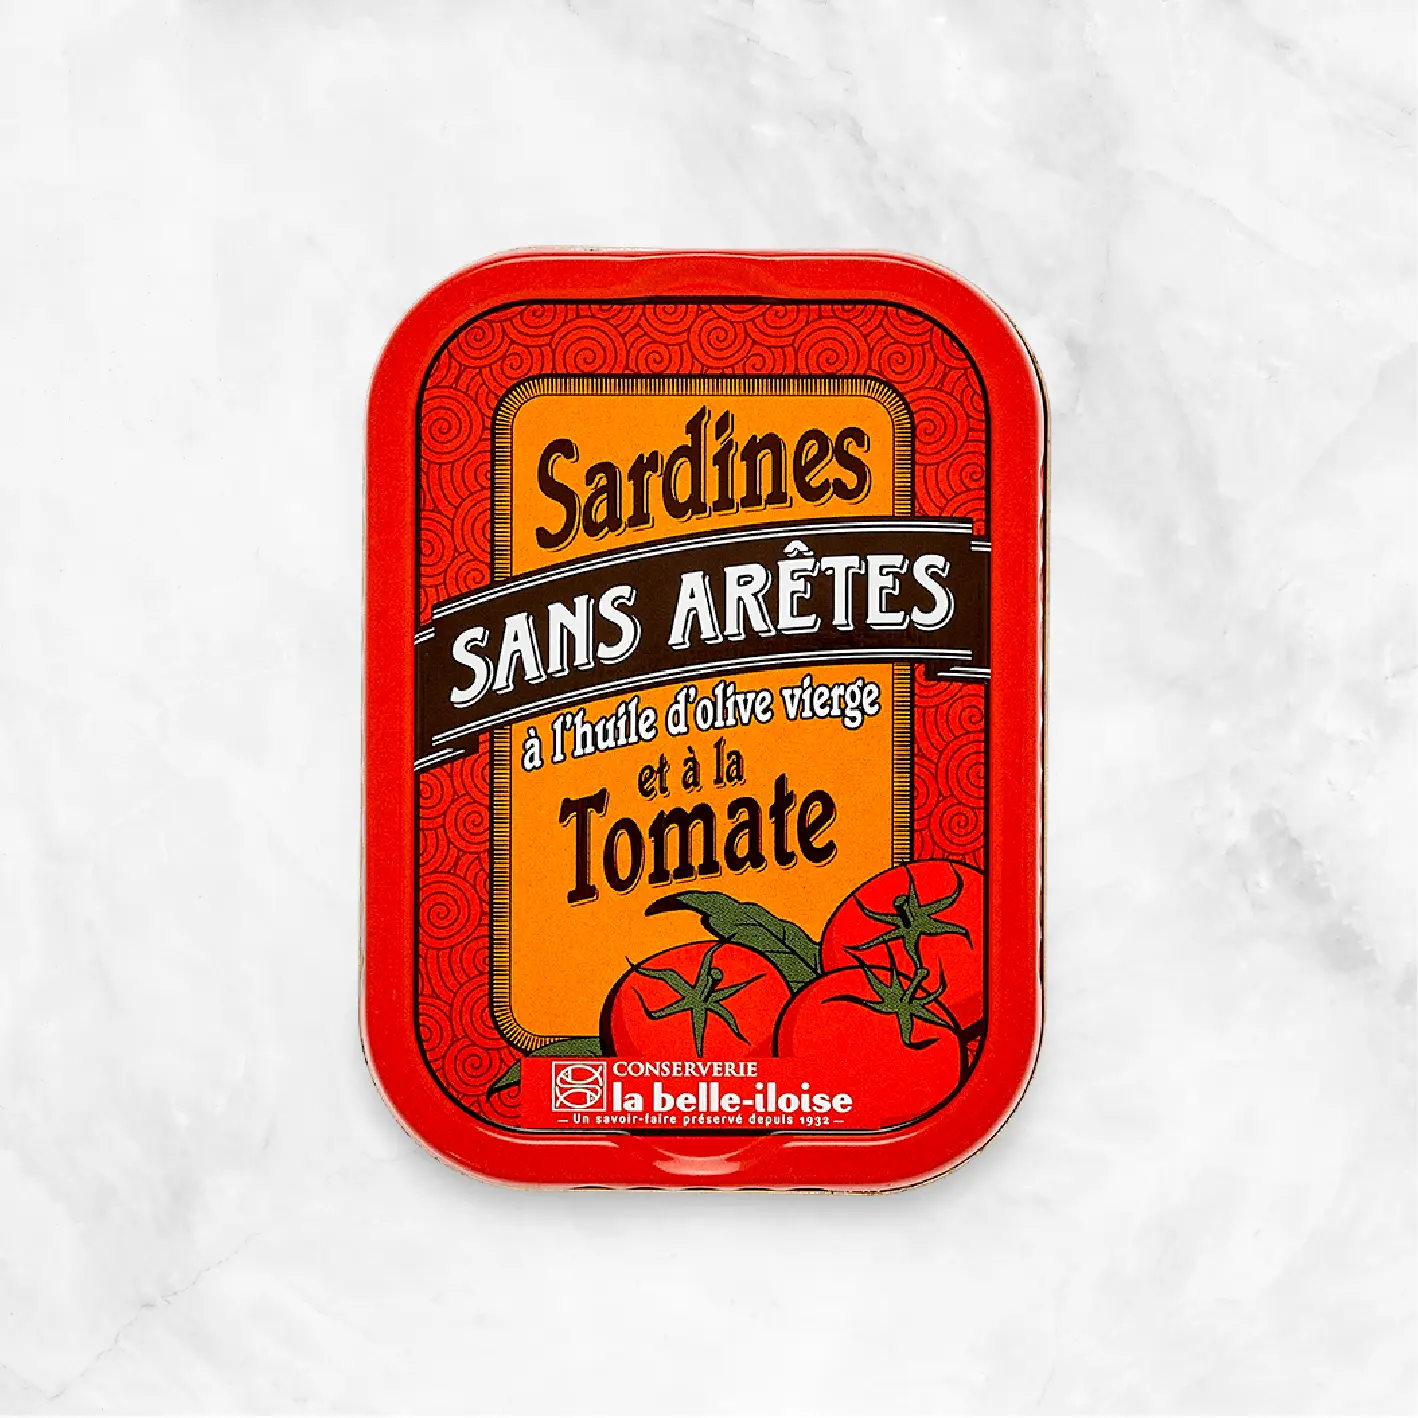 Boneless Sardines with Olive Oil & Tomato Delivery